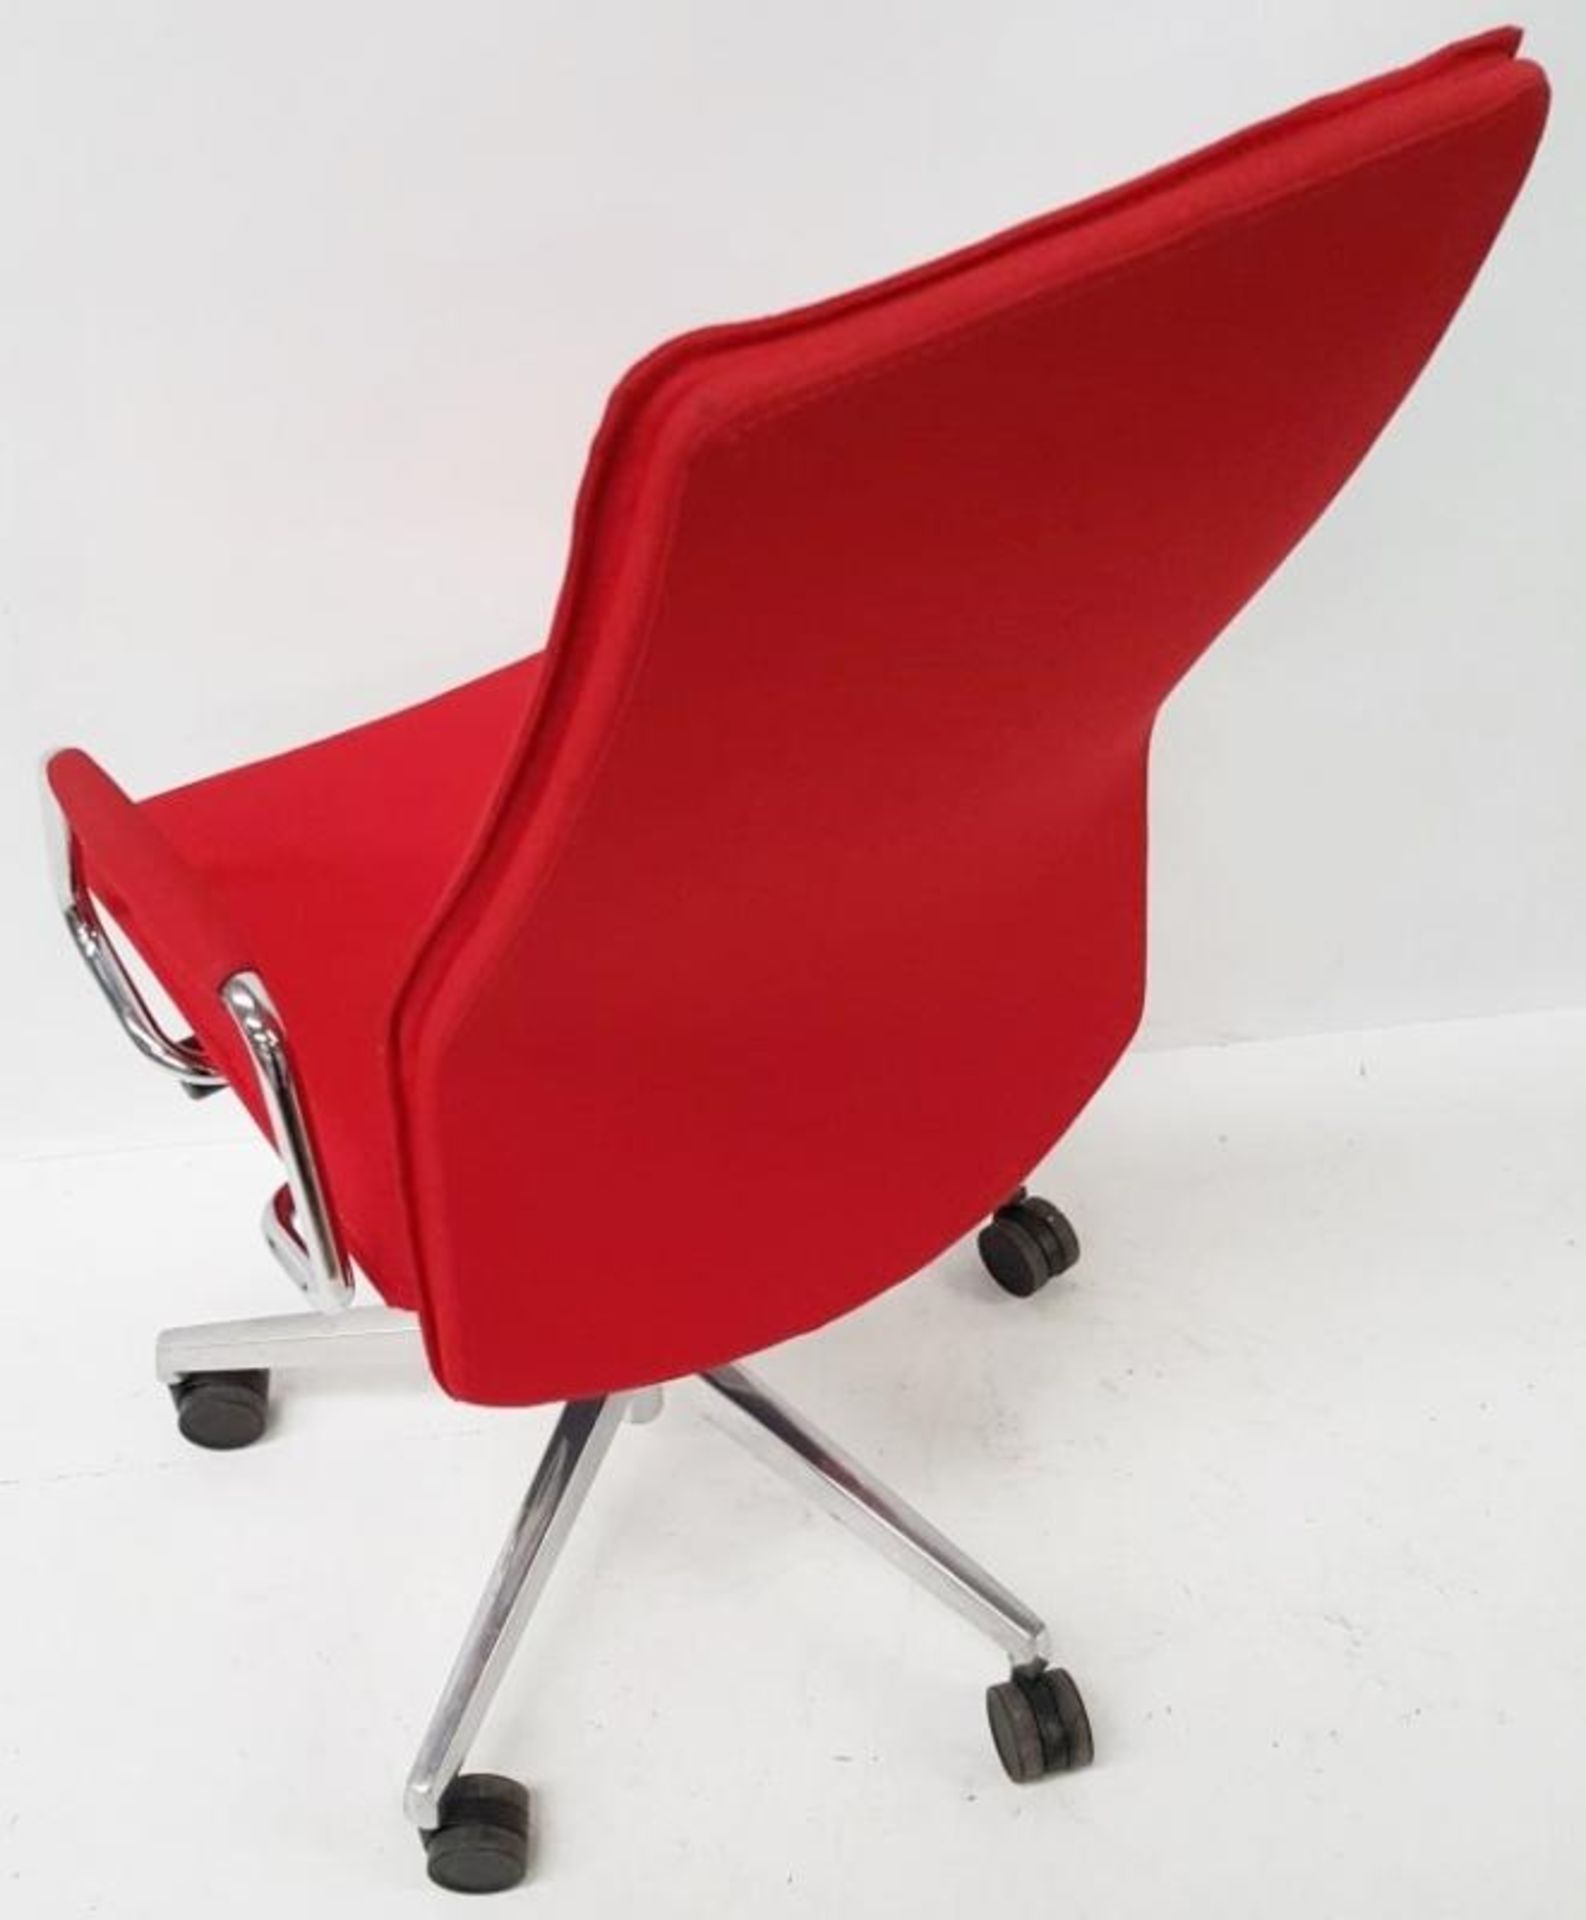 1 x 'Sven Christiansen' Premium Designer High-back Office Chair In Red (HBB1HA) - Used, In Very Good - Image 3 of 7